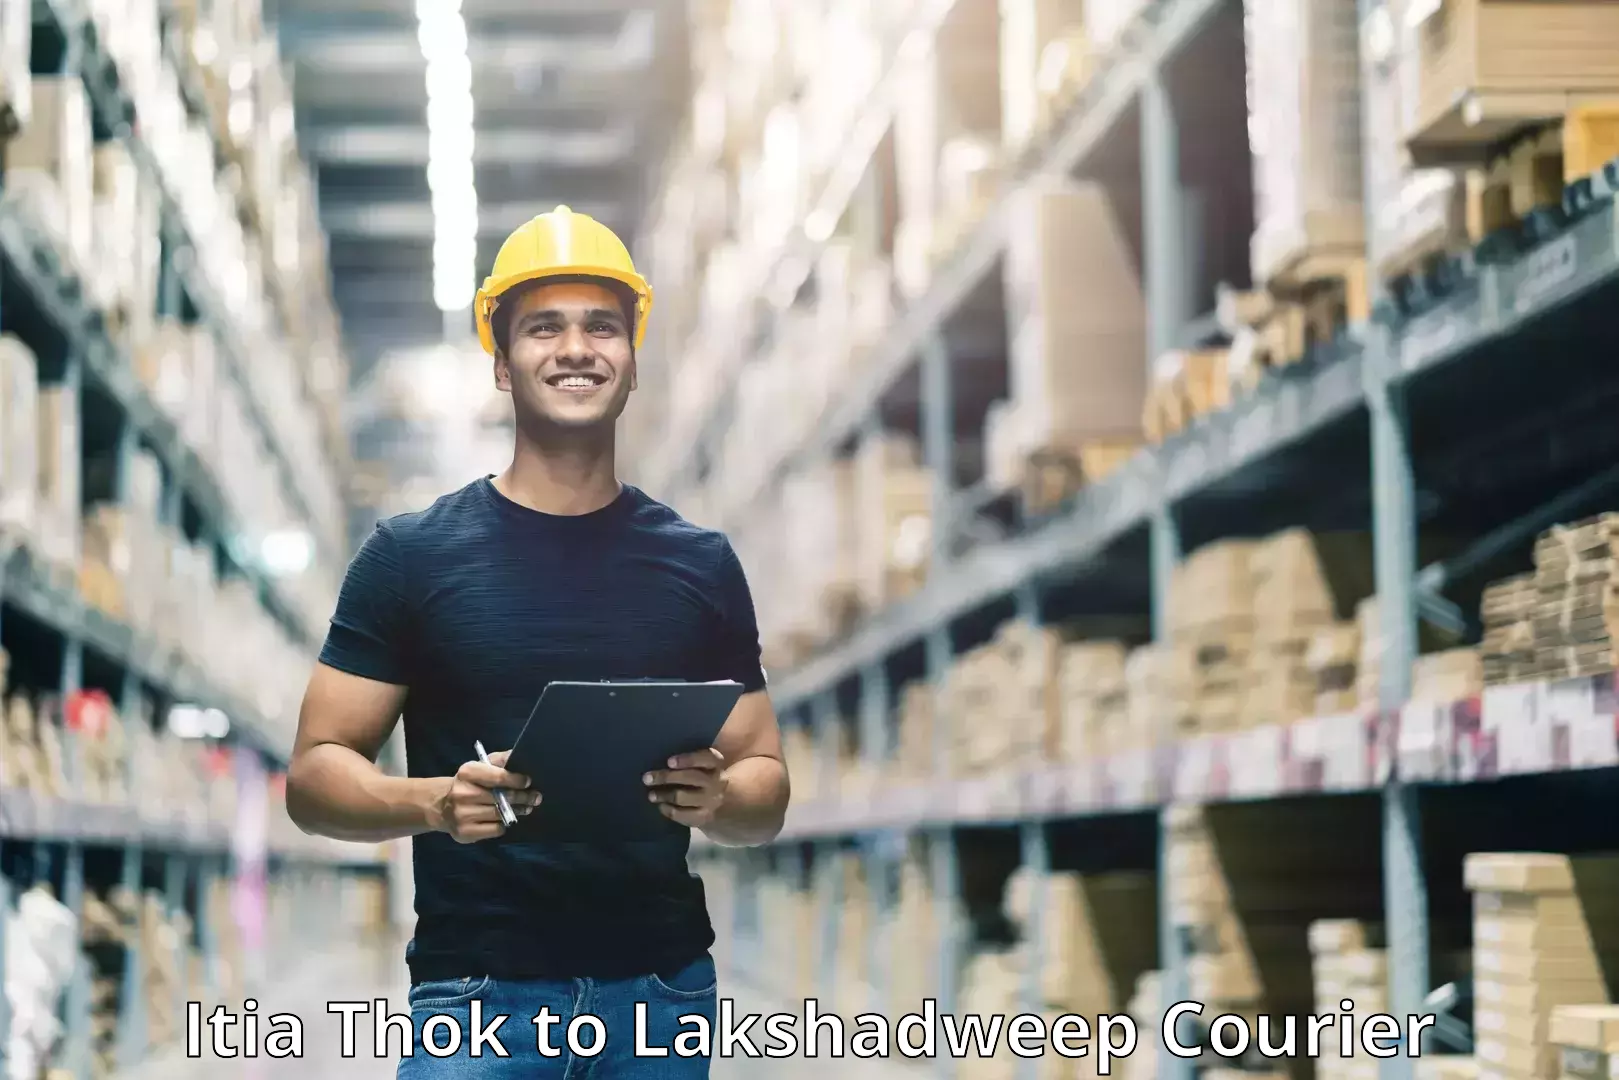 Parcel delivery automation Itia Thok to Lakshadweep